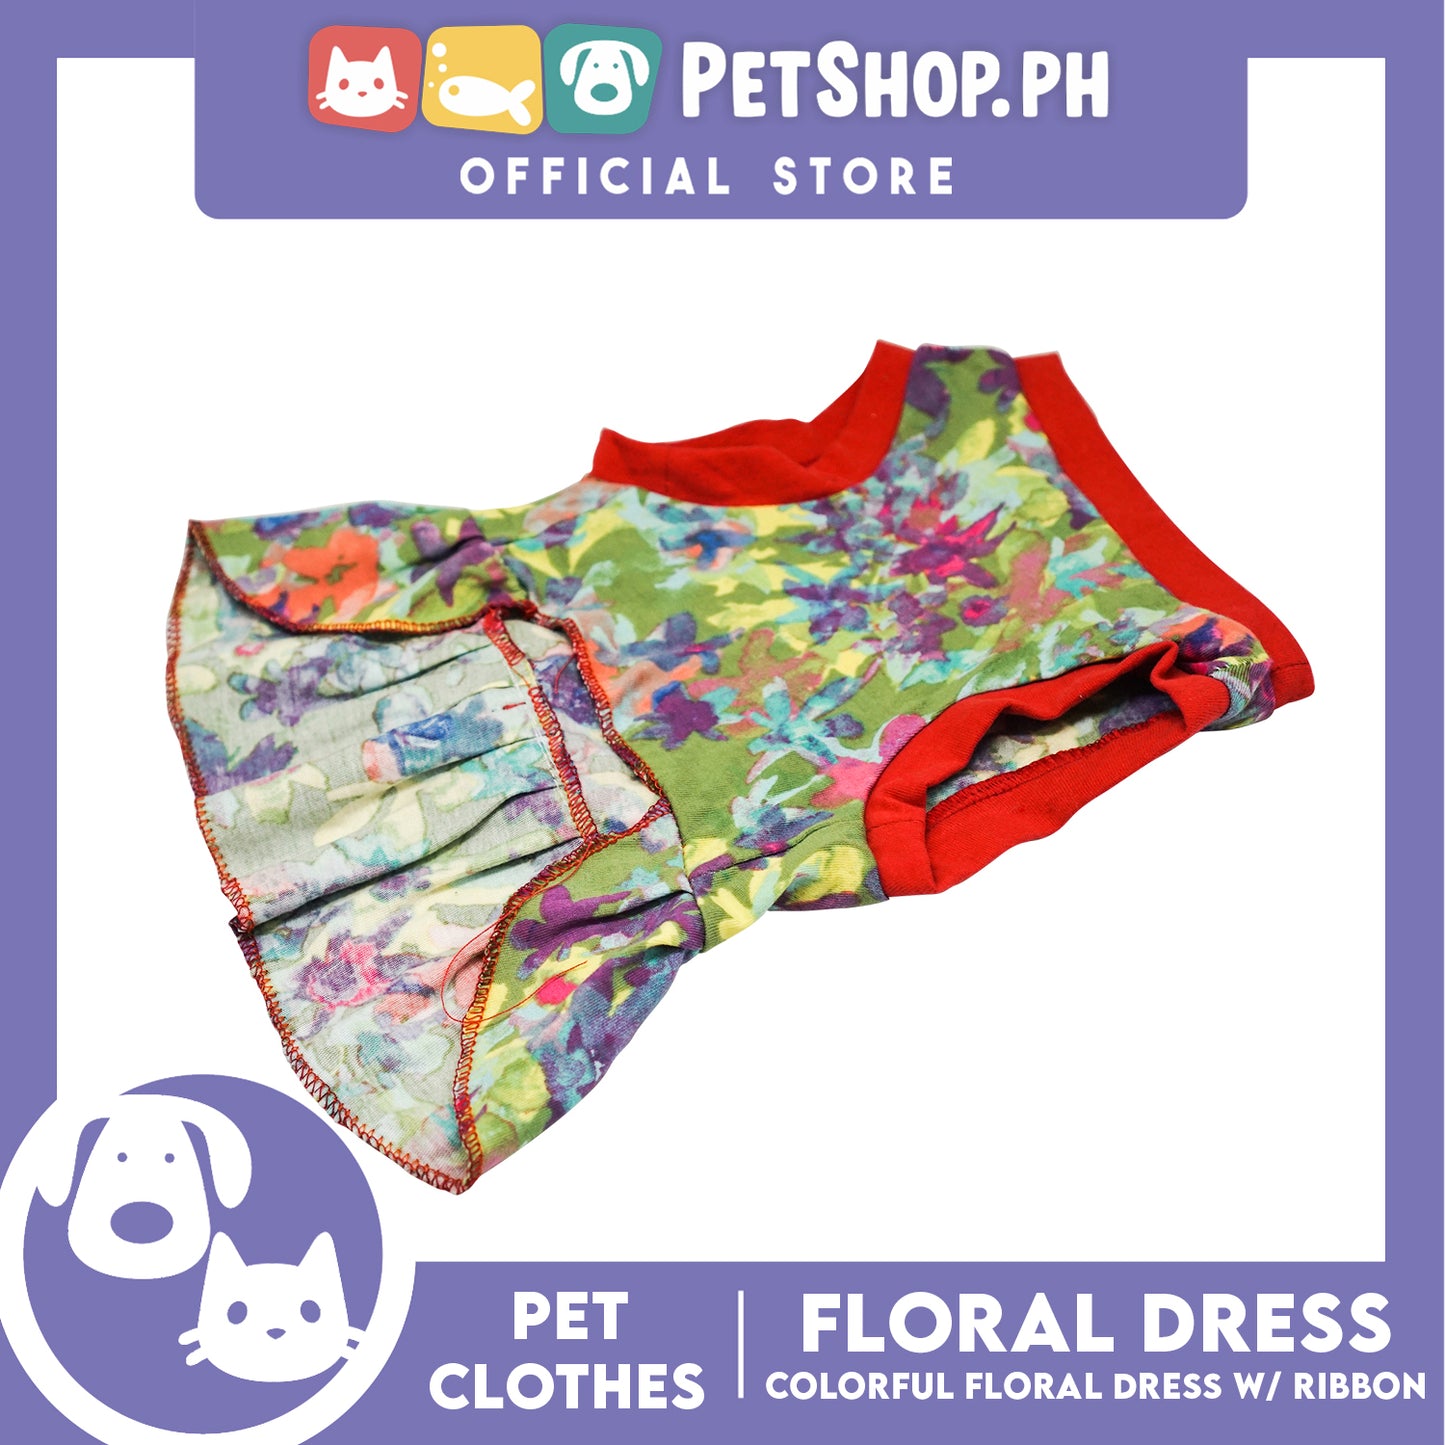 Colorful Floral Pet Dress with Red Ribbon (Small) Pet Shirt for Puppy, Small Dogs and Cats